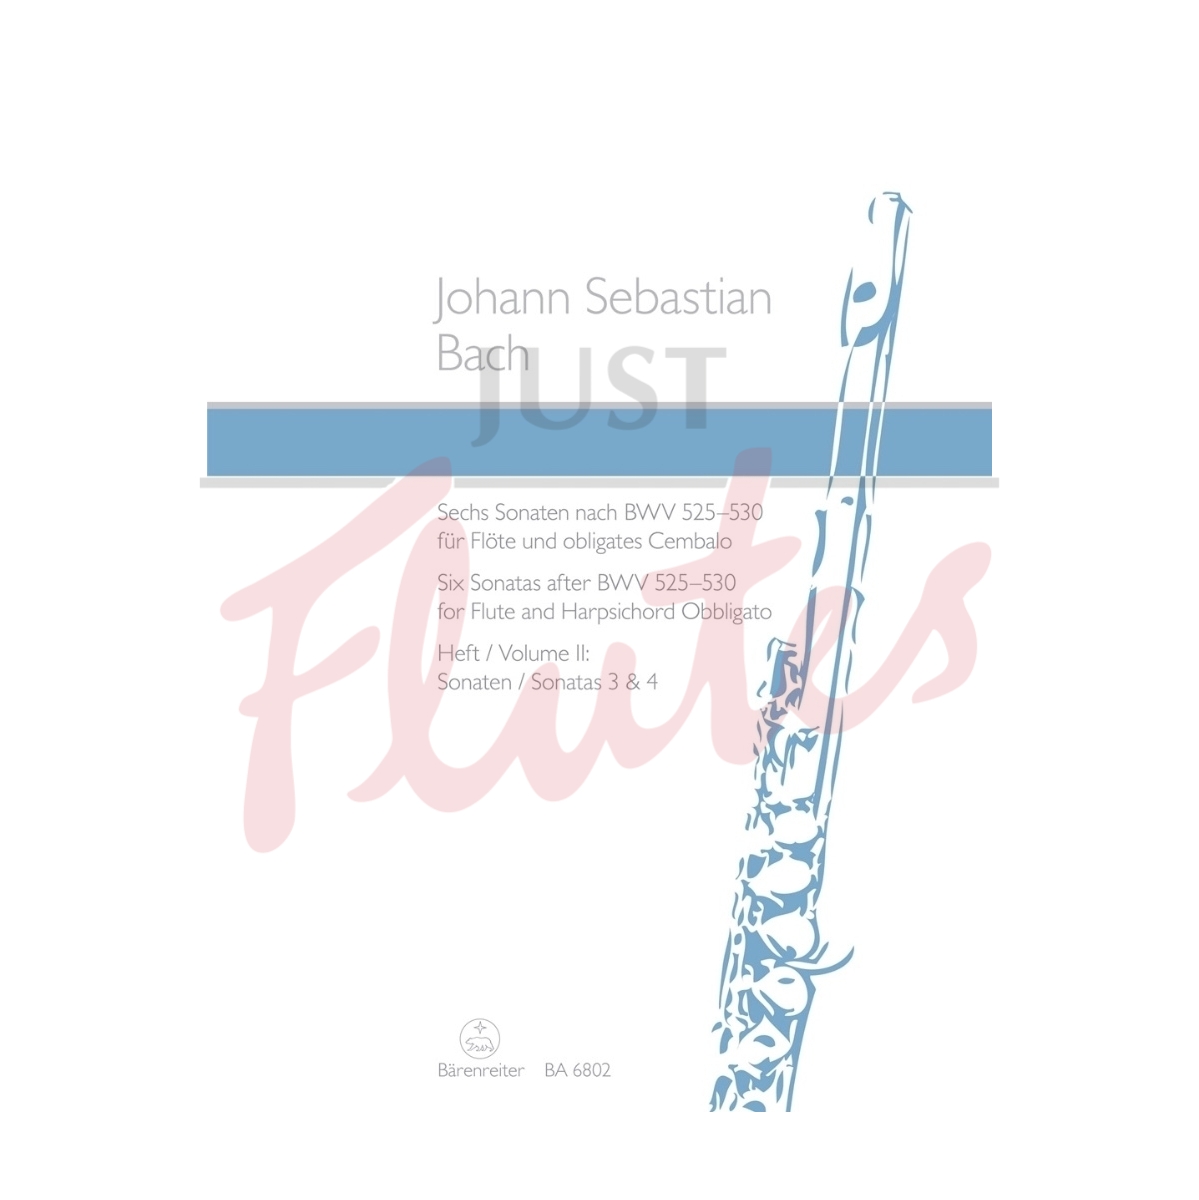 Six Sonatas after BWV 525-530 for Flute and Harpsichord Obbligato